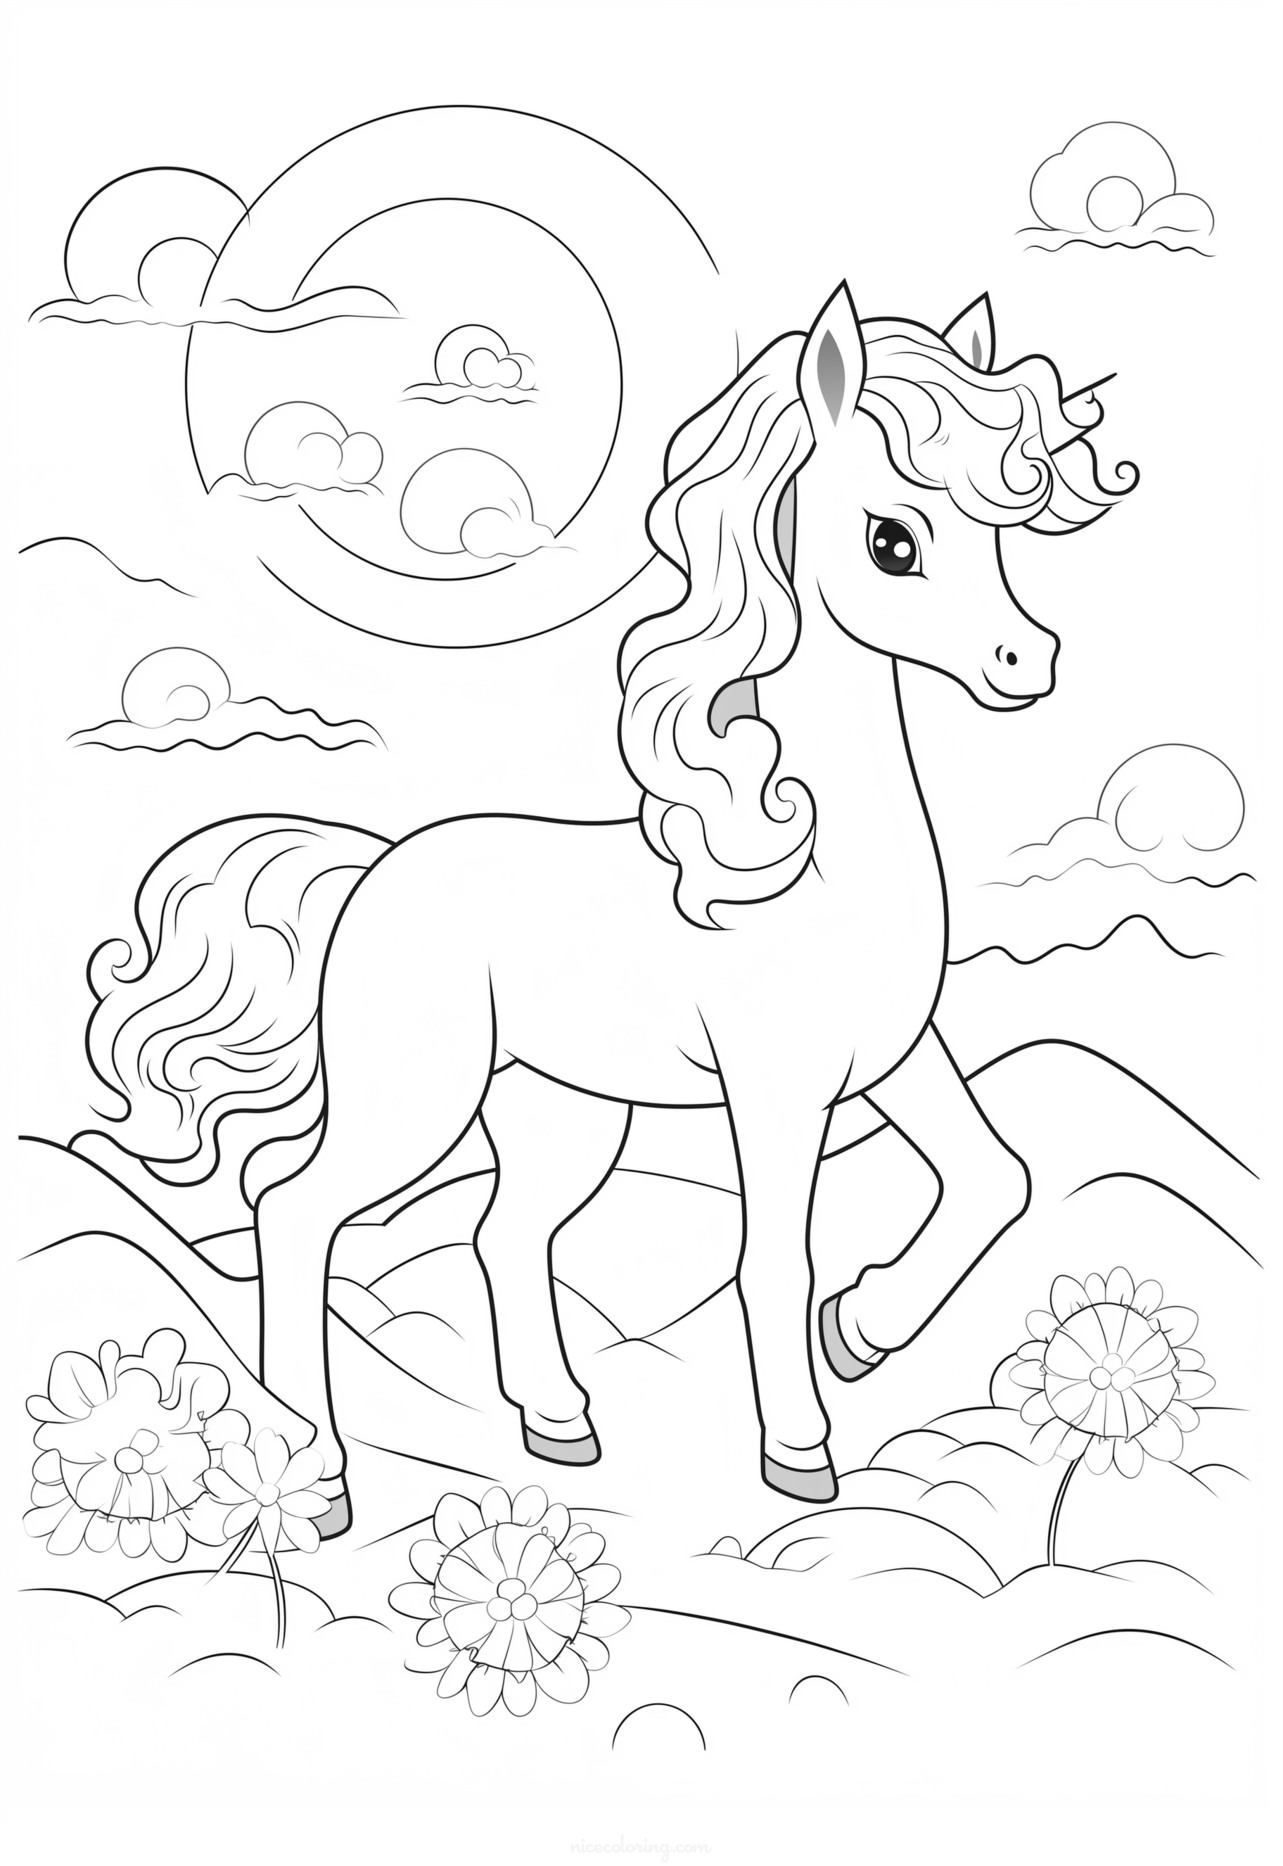 Horse standing in a field coloring page